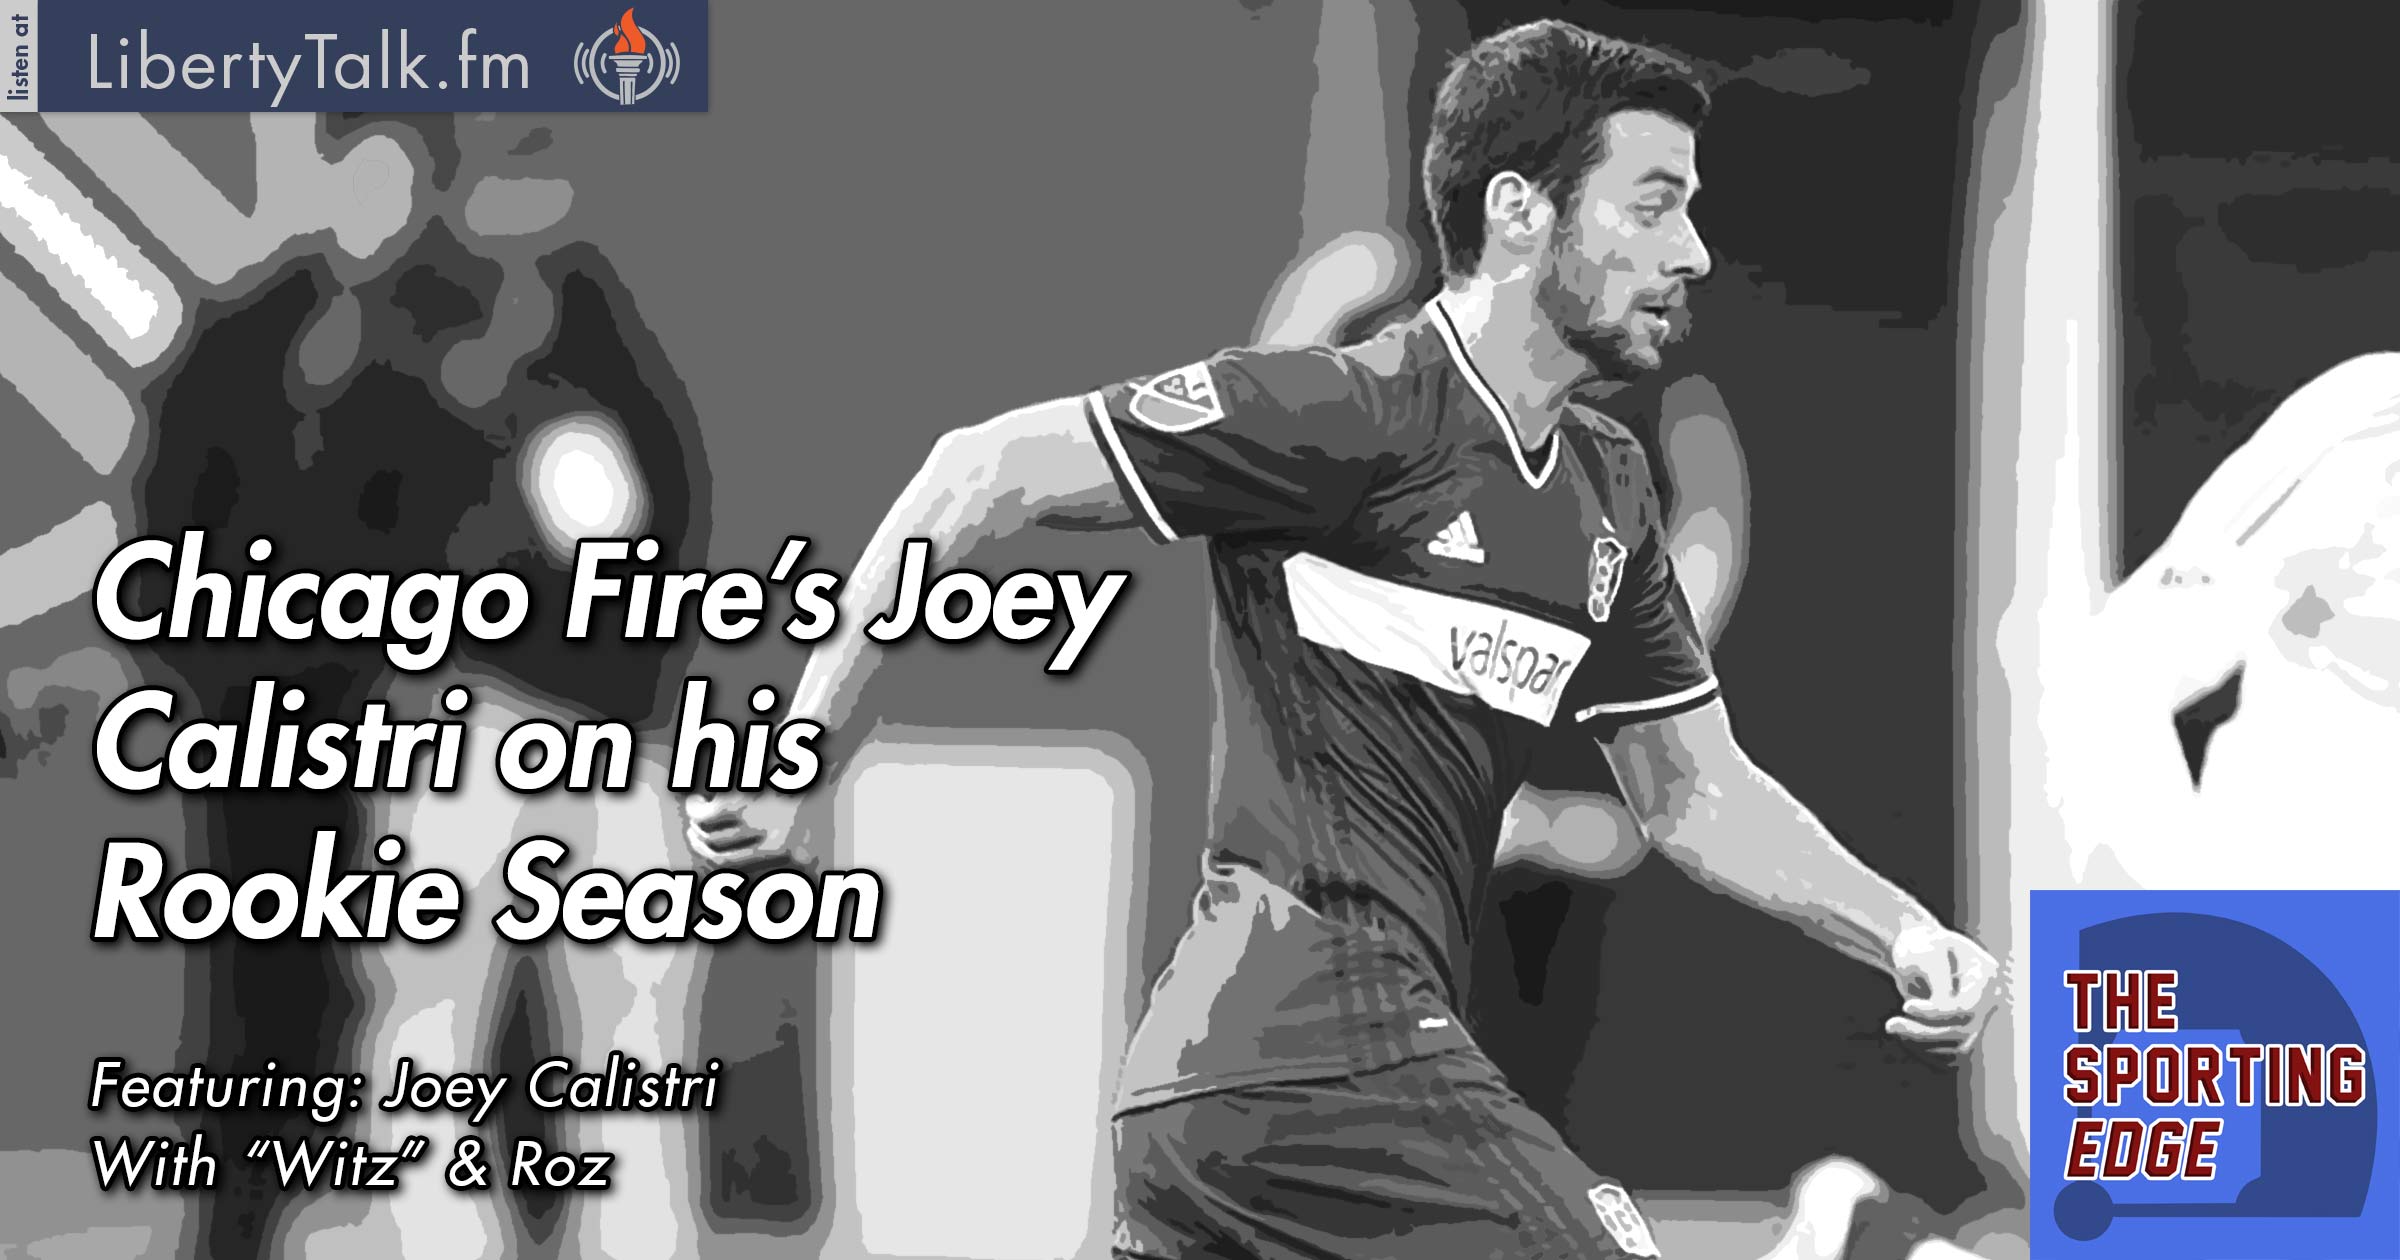 Chicago Fire’s Joey Calistri on his Rookie Season - The Sporting Edge